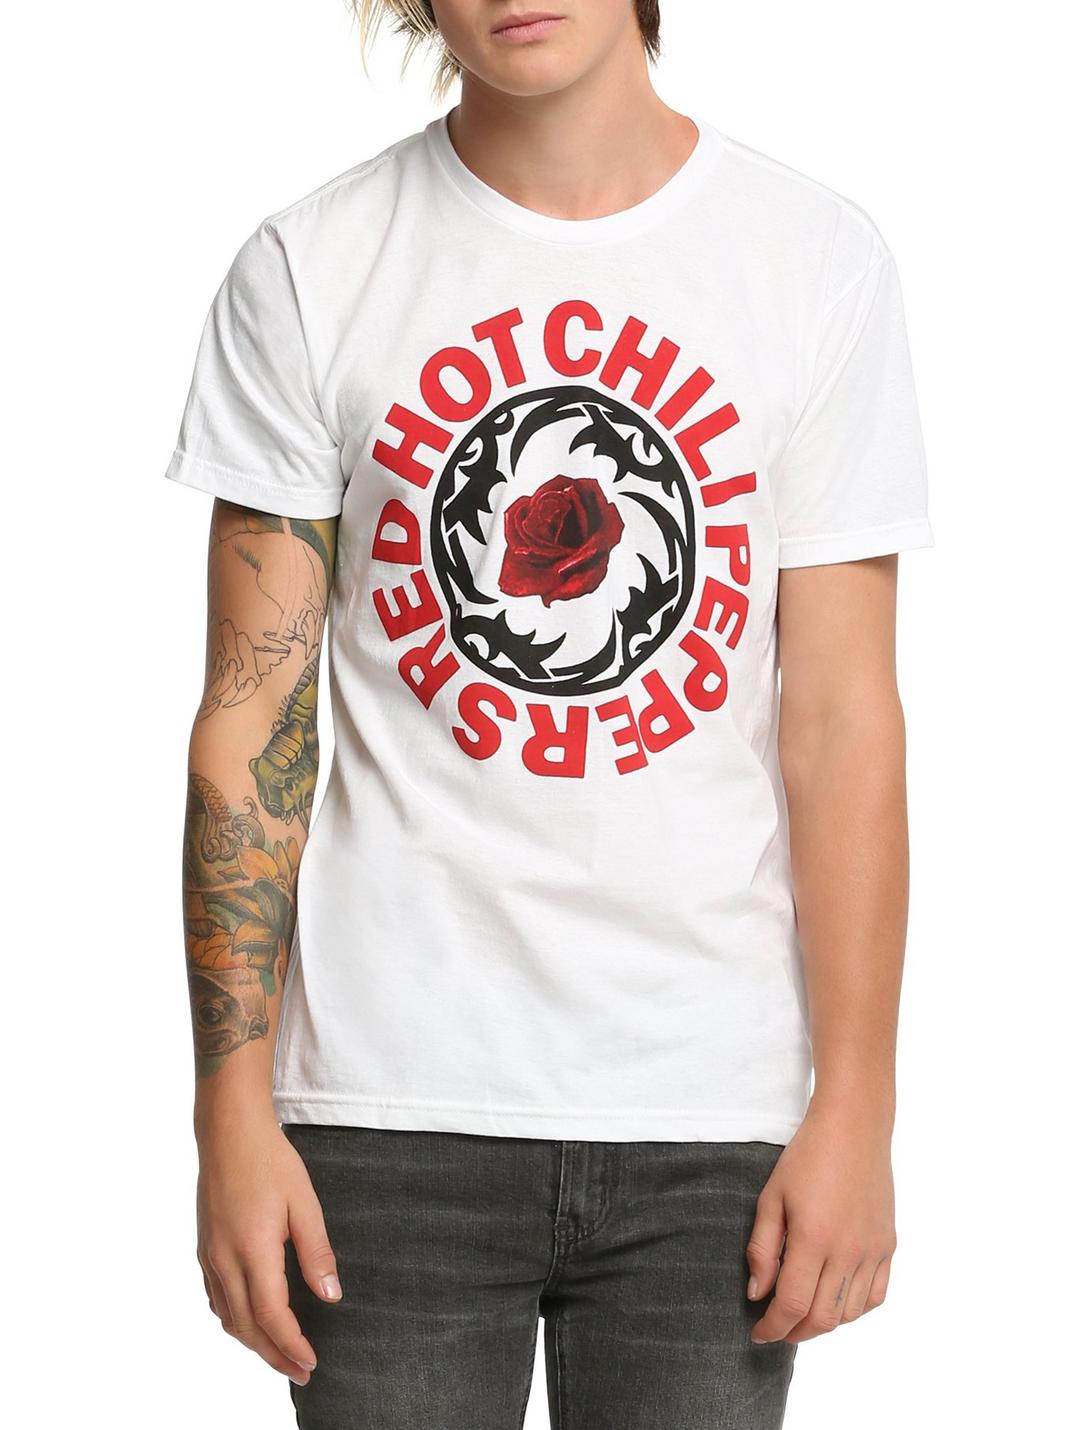 Red Hot Chili Peppers Tribal Rose Logo T-Shirt, WHITE, hi-res